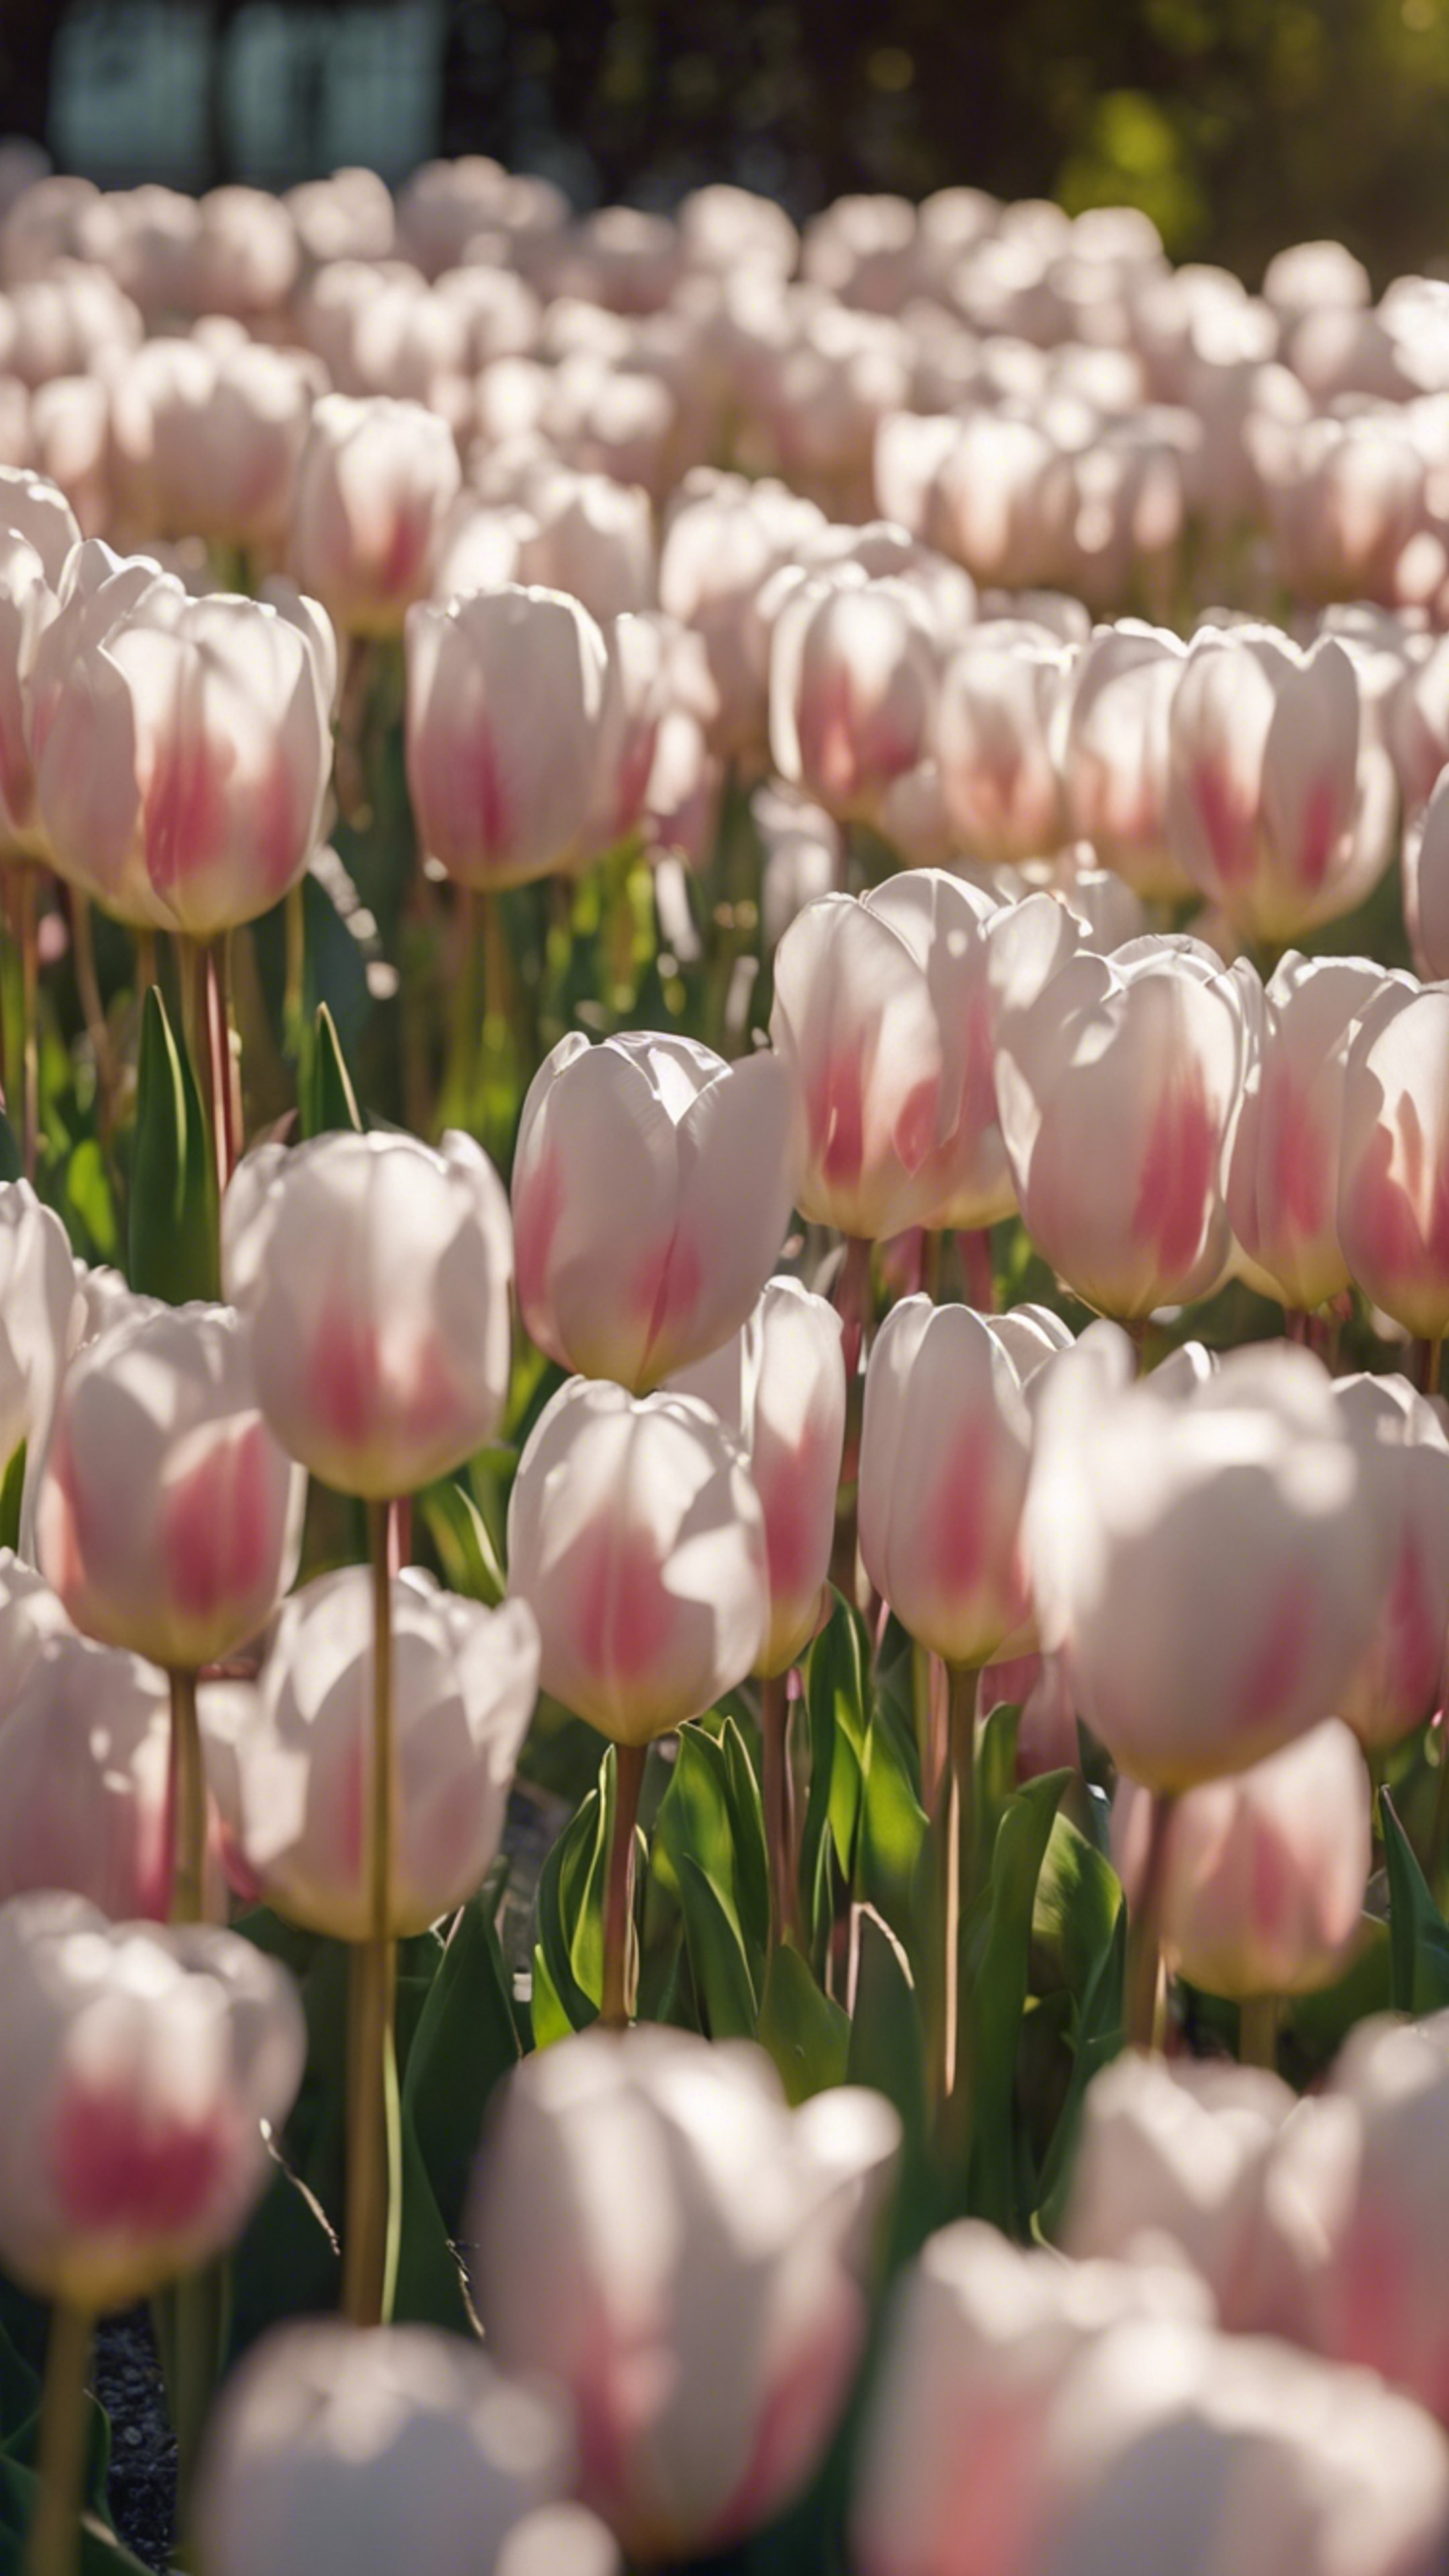 A garden filled with white and pink tulips, shimmering under the soft glow of a morning sun. Tapeta[0043435f230e41f4a509]